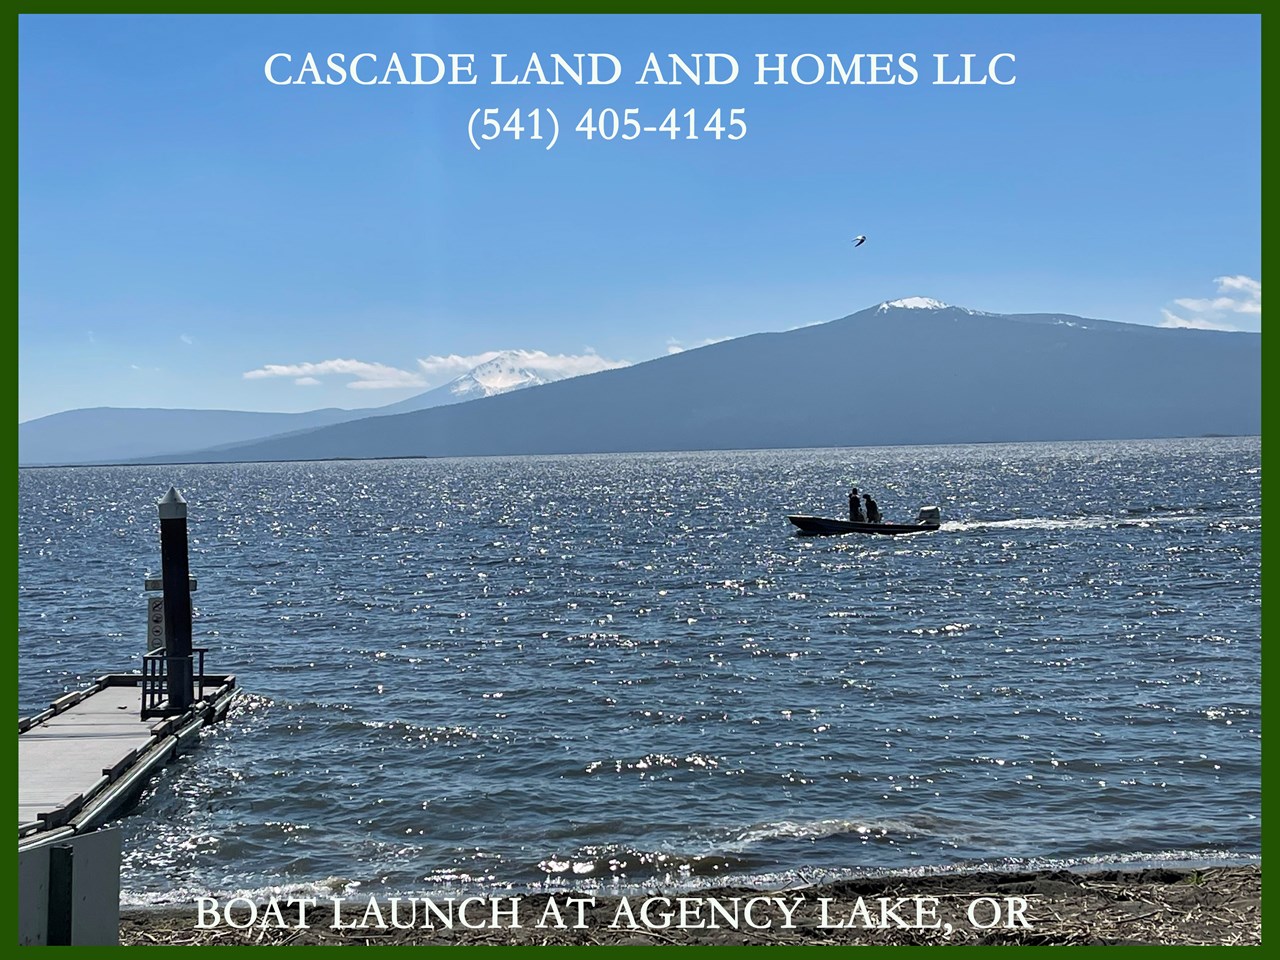 agency lake and the wood river wetlands are just a few miles west. you can also travel north about 5 miles on hwy 97 to the klay-mo-ya casino or on to bend, oregon which is the largest city in central oregon and a hub for recreational, cultural, educational, agricultural and artistic events.